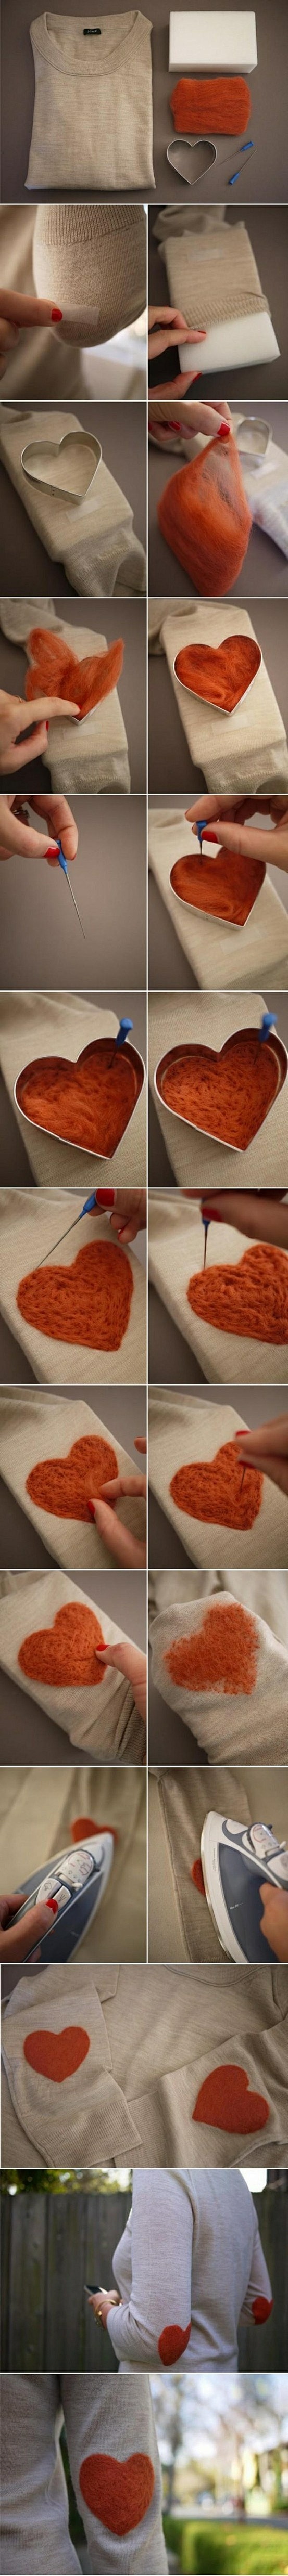 felted elbow patches...